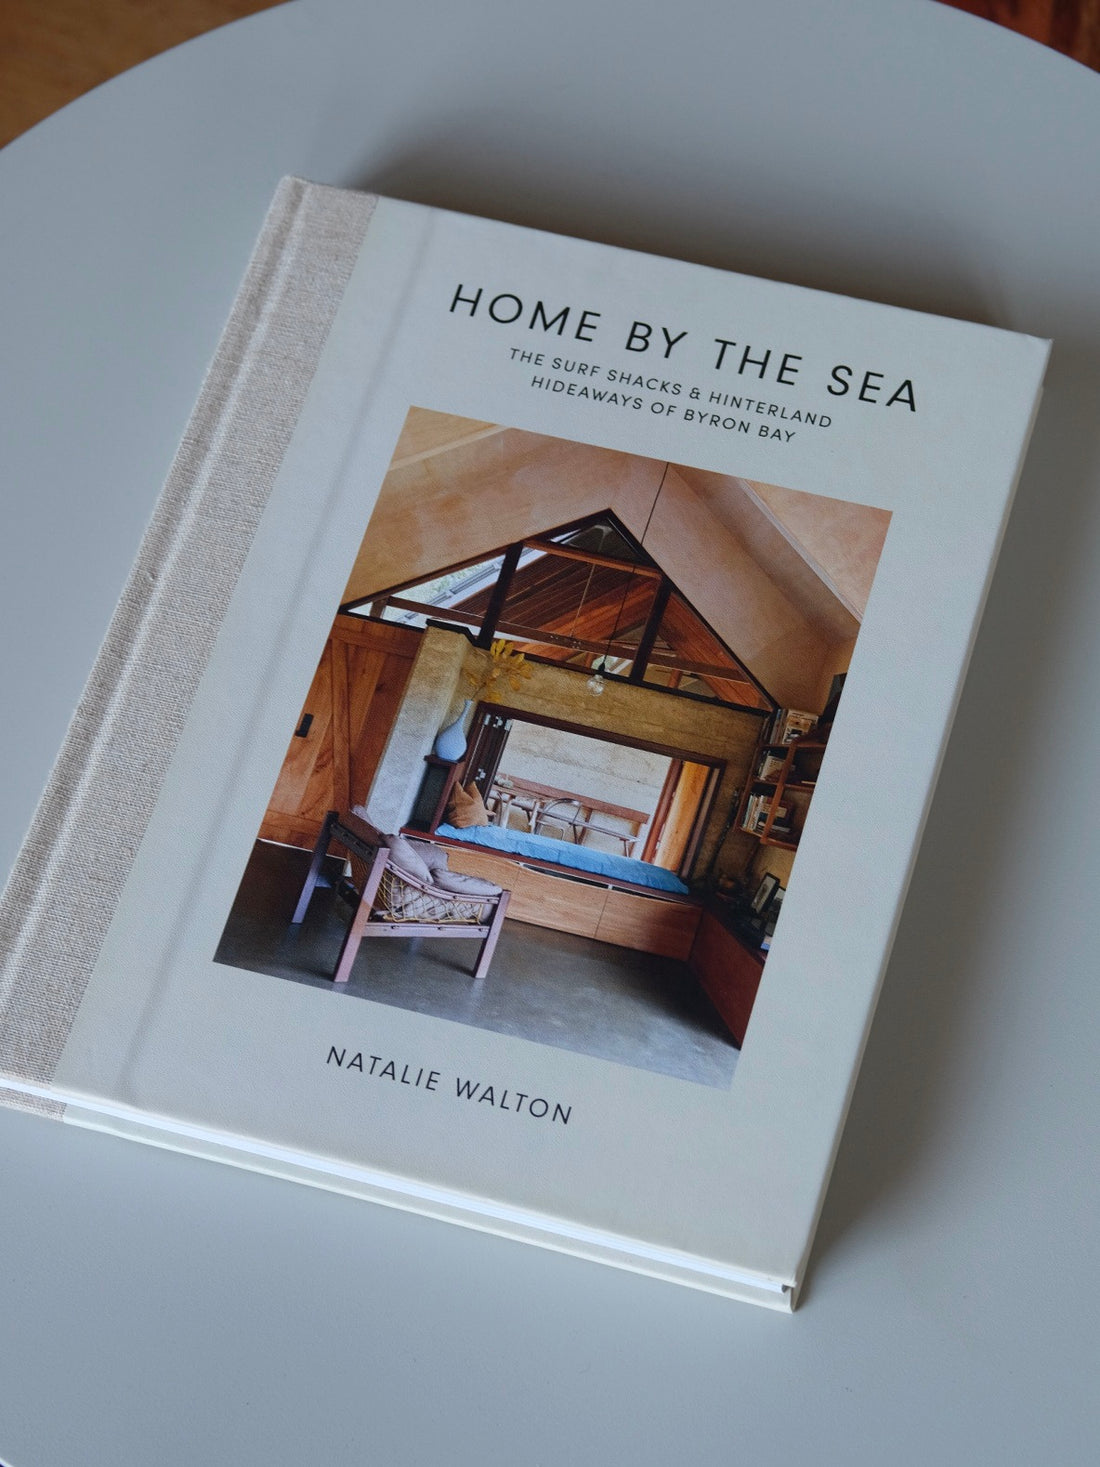 Home by the Sea by Natalie Walton